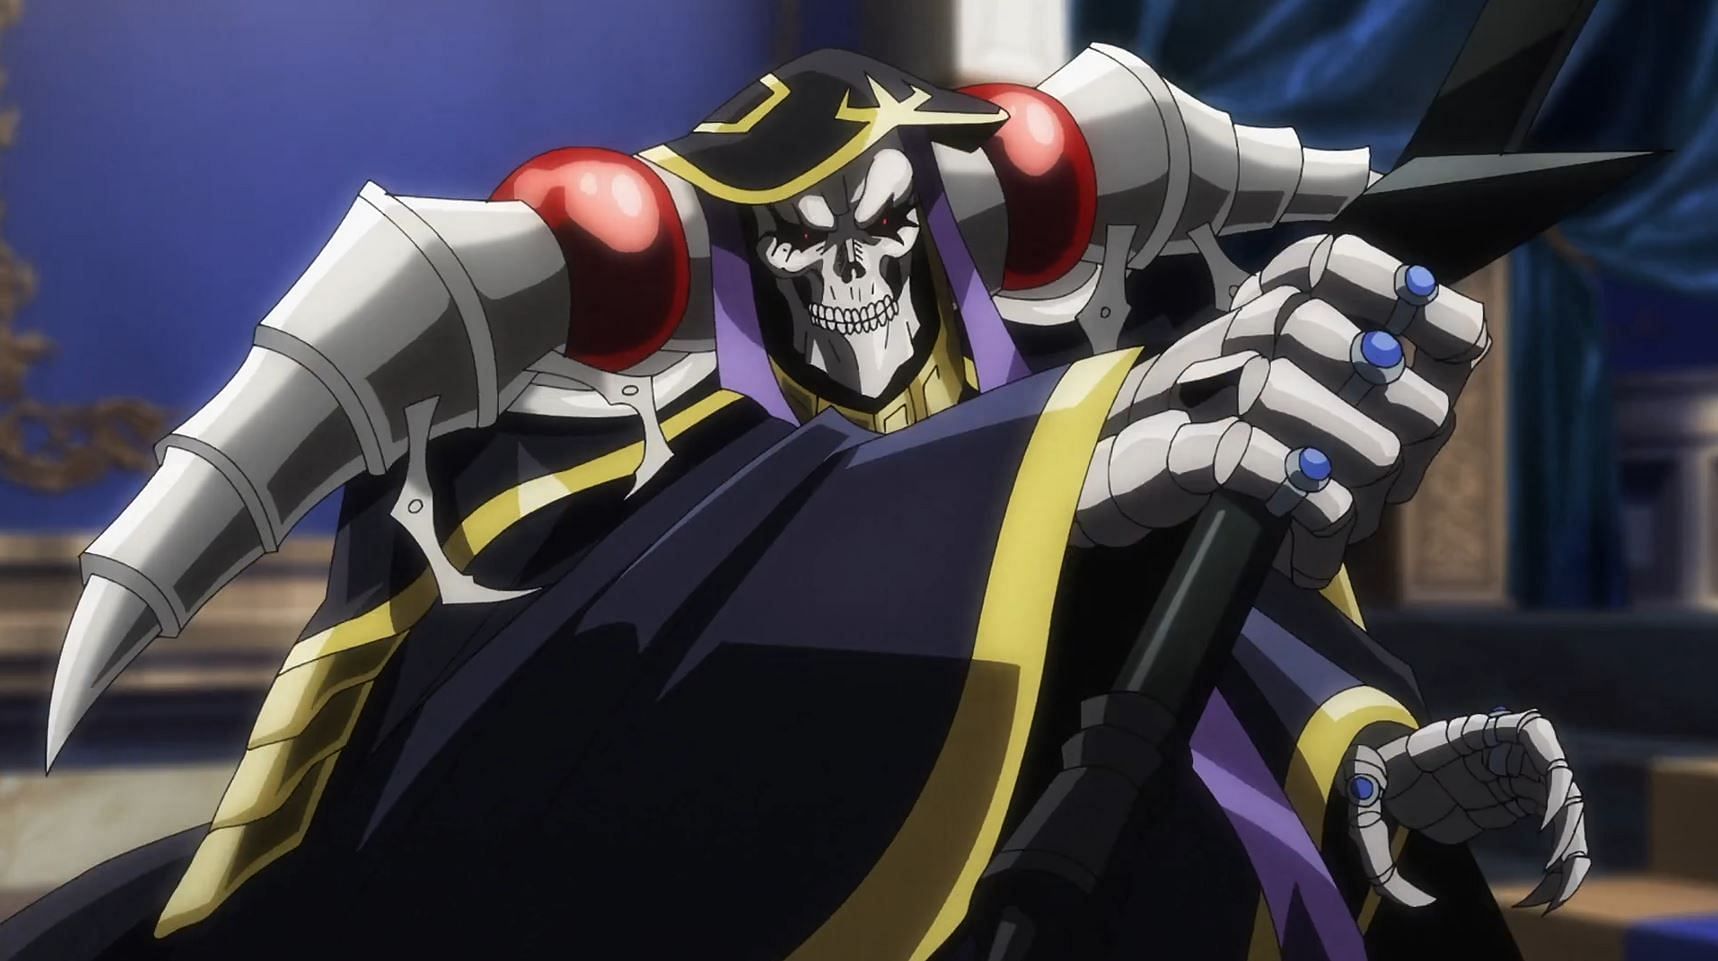 English Dub Review: Overlord IV “Sorcerer Kingdom Ains Ooal Gown